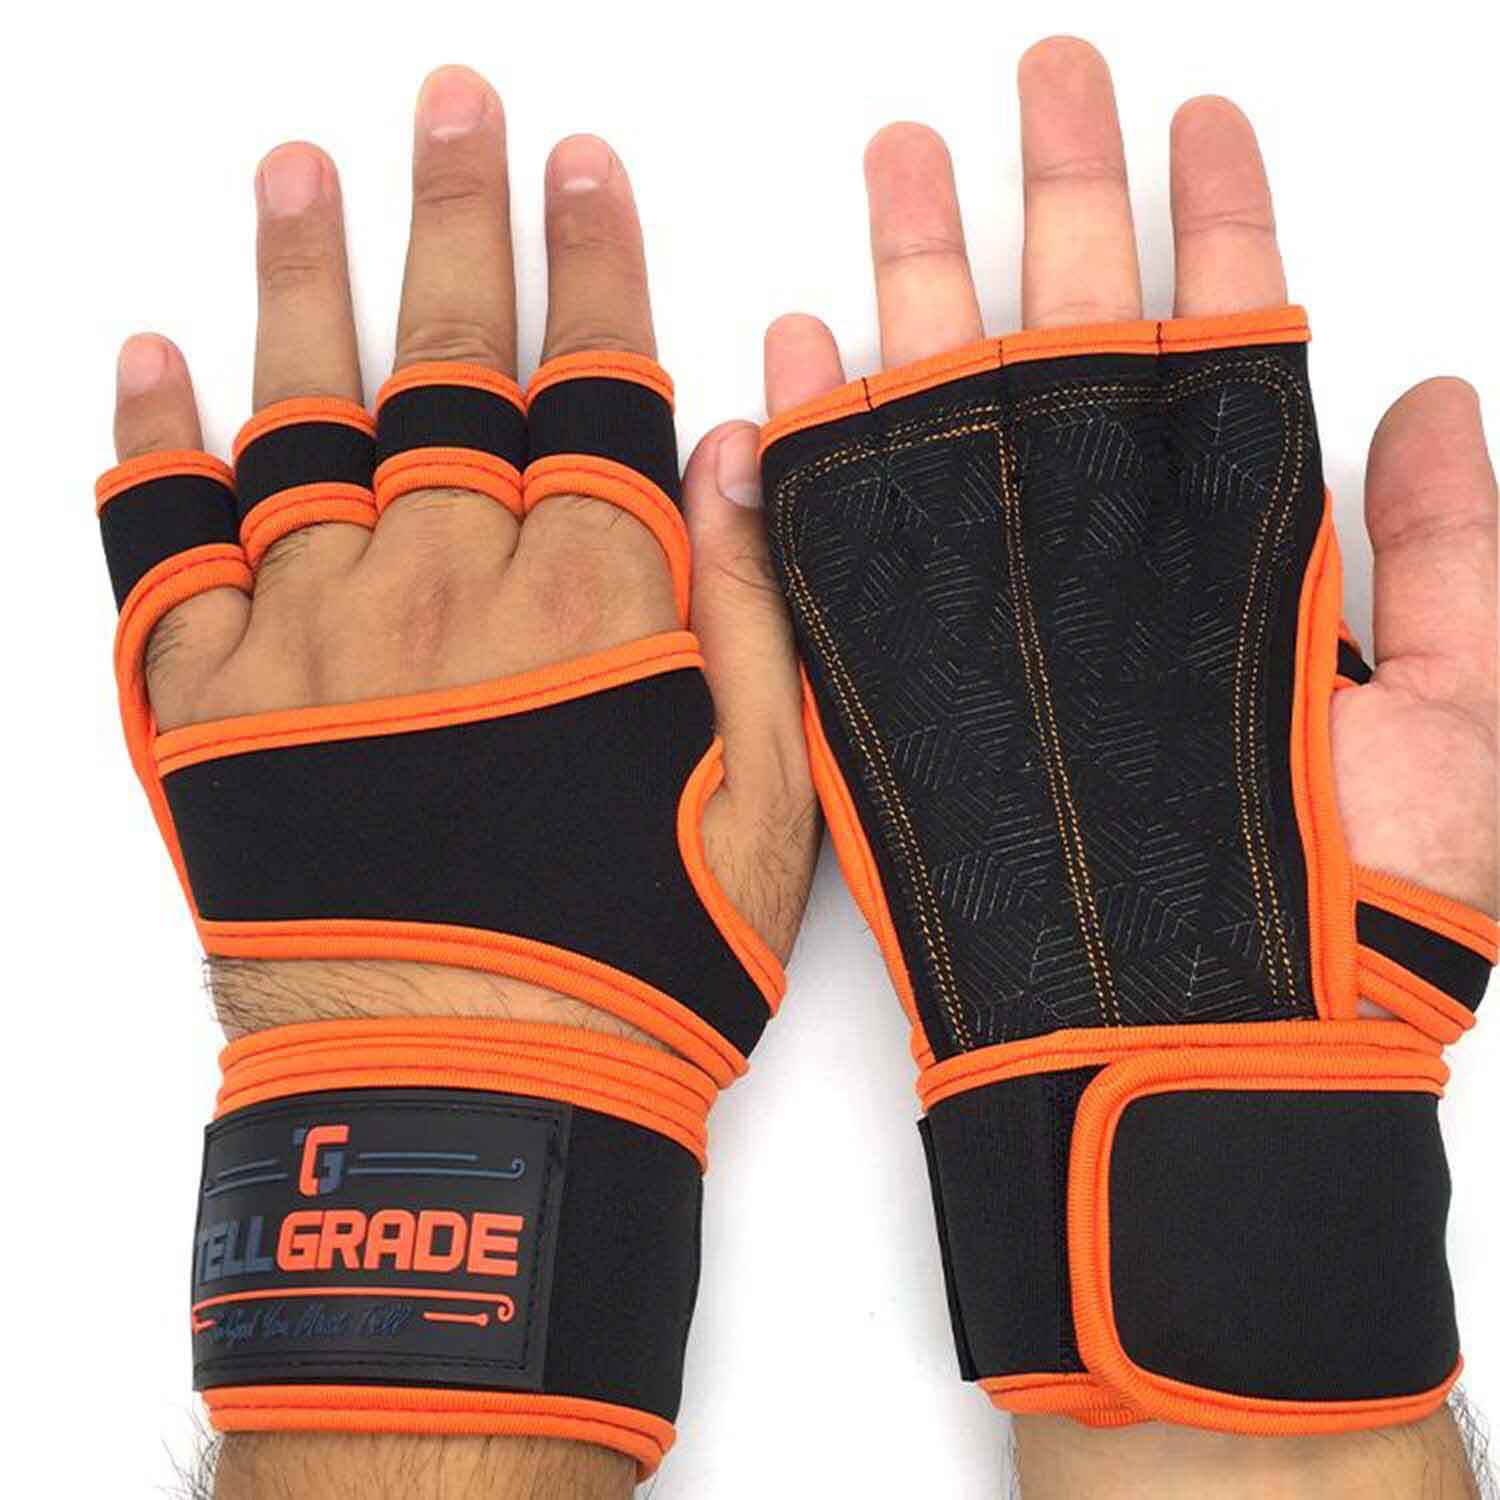 weight lifting gloves, workout gloves, exercise gloves, fitness gloves, weightlifting gloves, wrist wraps, lifting gloves, sports gloves, gym gloves